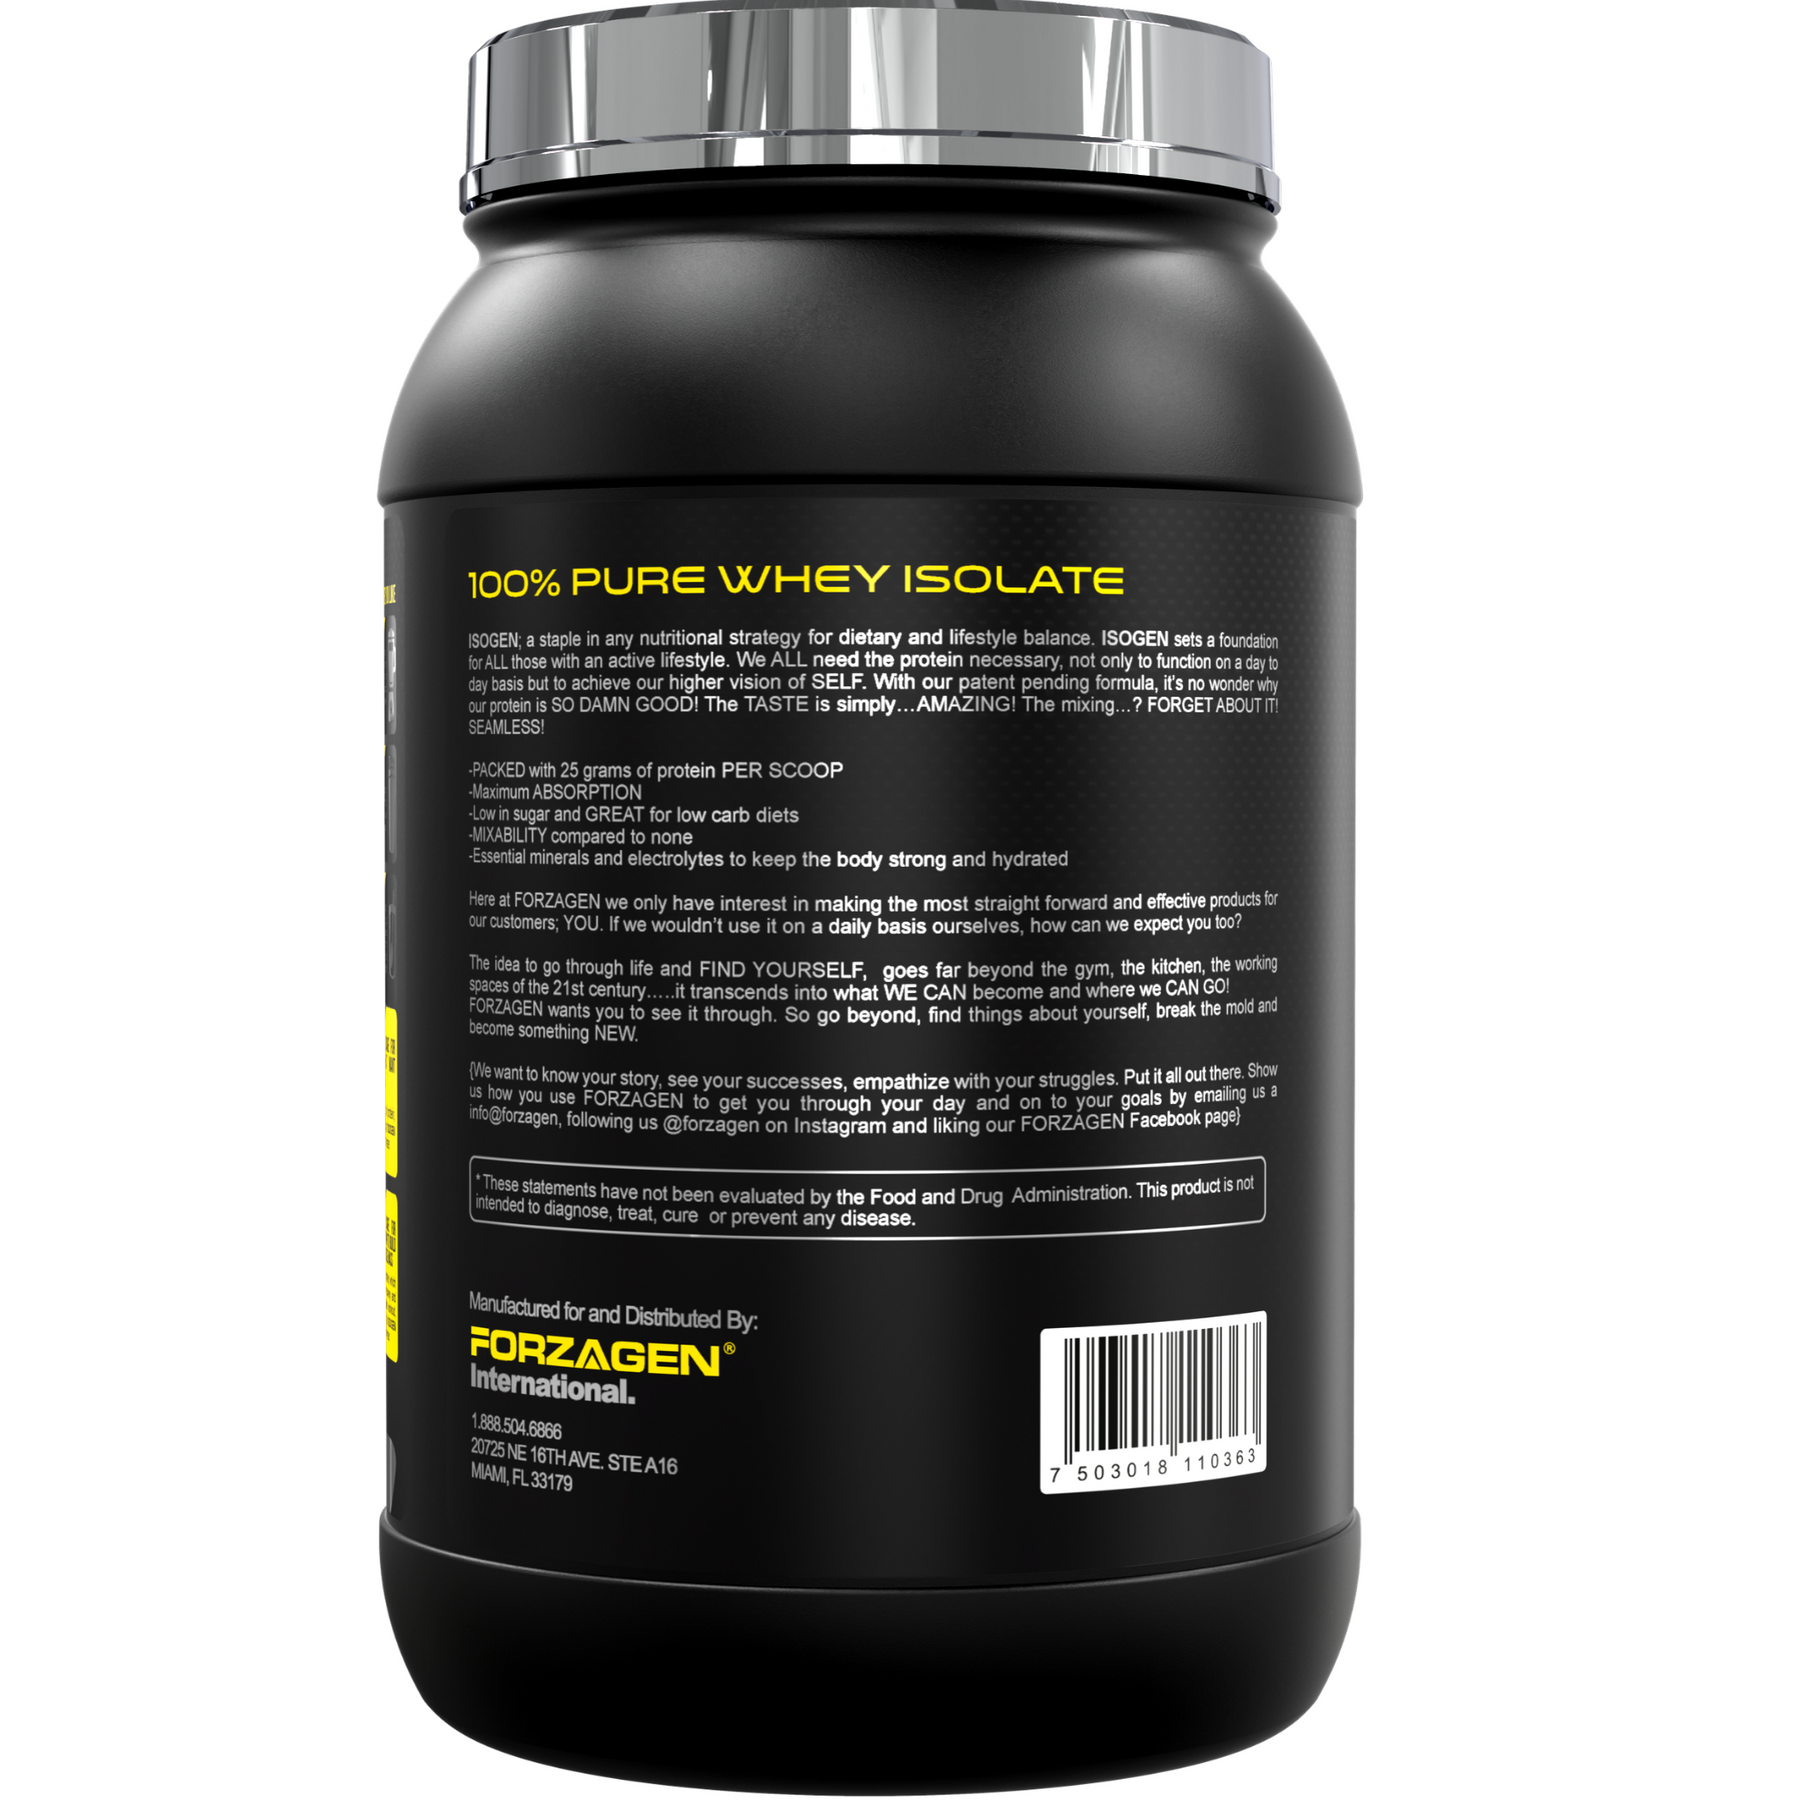 ISOGEN Protein Pure Whey Isolate 2 – FORZAGEN